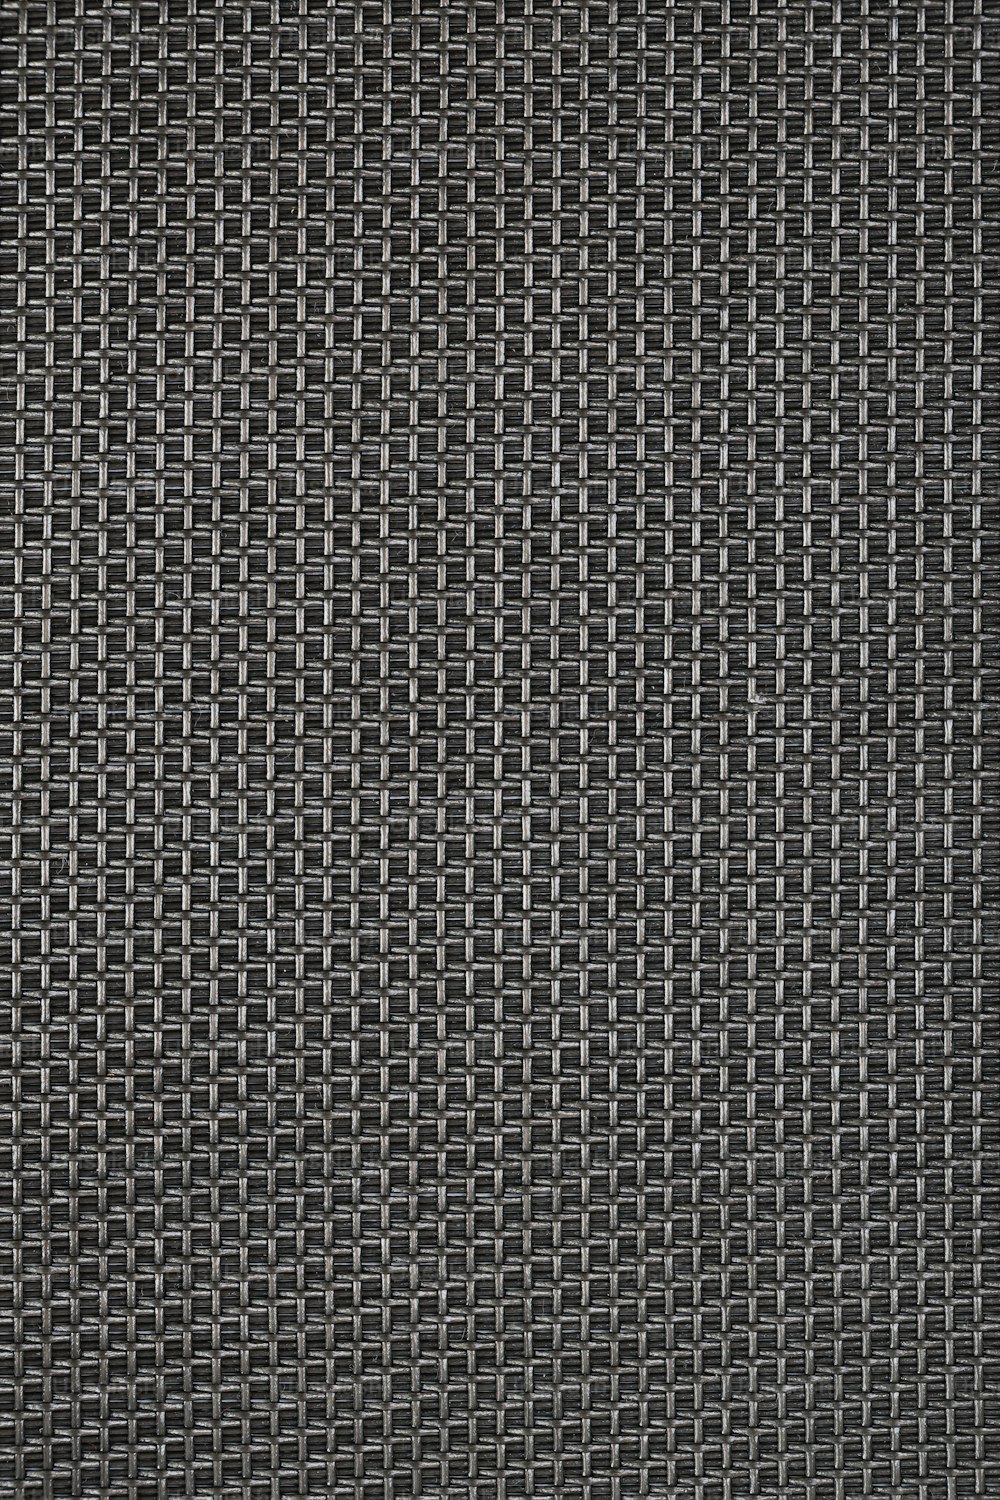 a close up of a black and white textured background